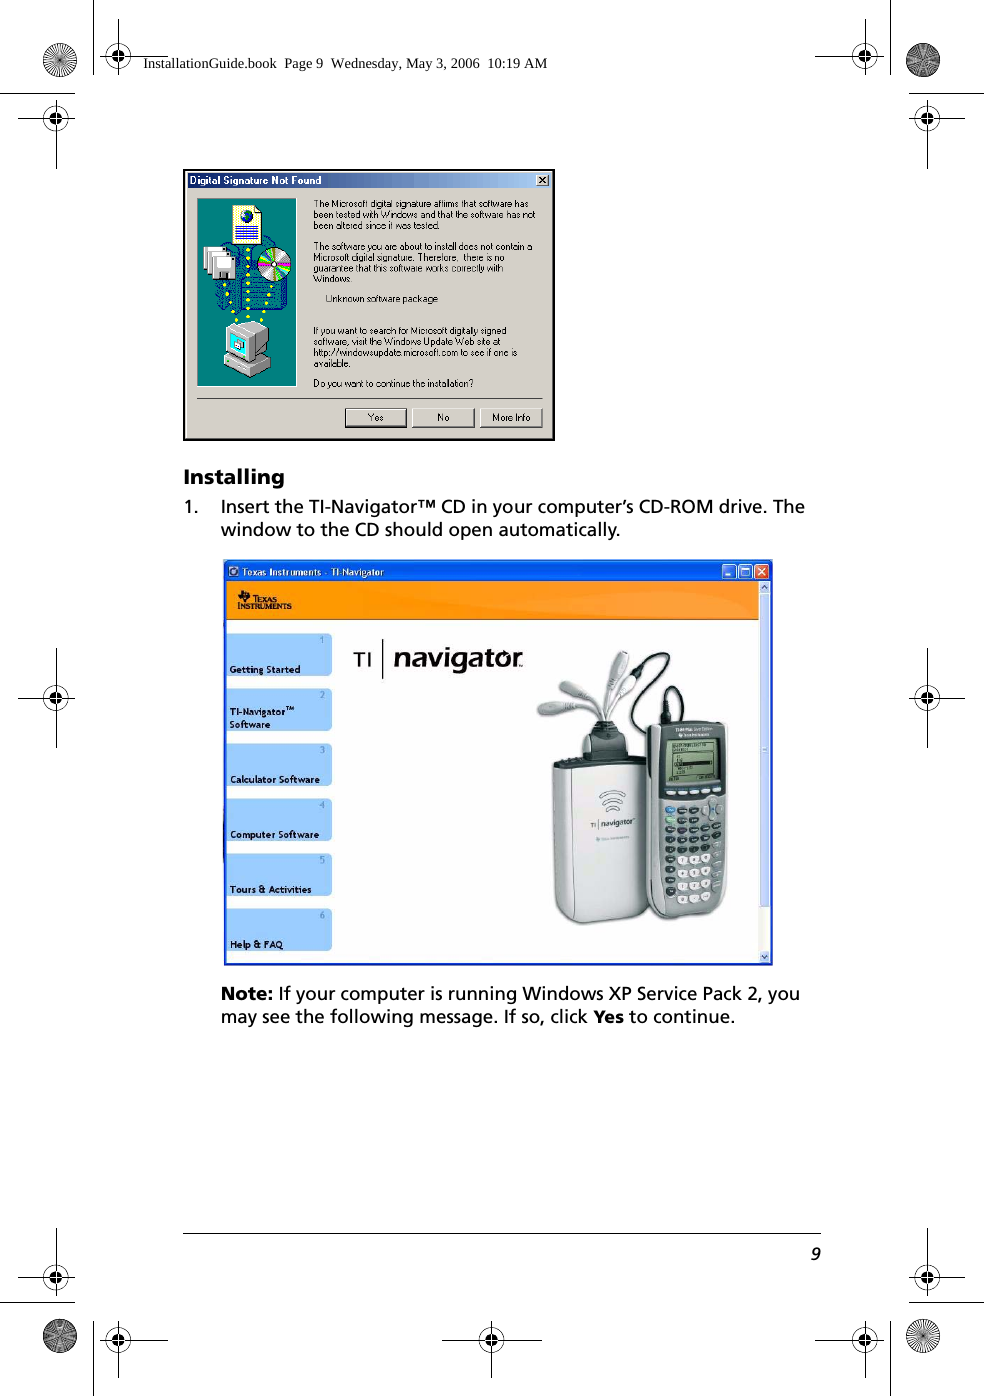 9Installing1. Insert the TI-Navigator™ CD in your computer’s CD-ROM drive. The window to the CD should open automatically.Note: If your computer is running Windows XP Service Pack 2, you may see the following message. If so, click Yes to continue.InstallationGuide.book  Page 9  Wednesday, May 3, 2006  10:19 AM